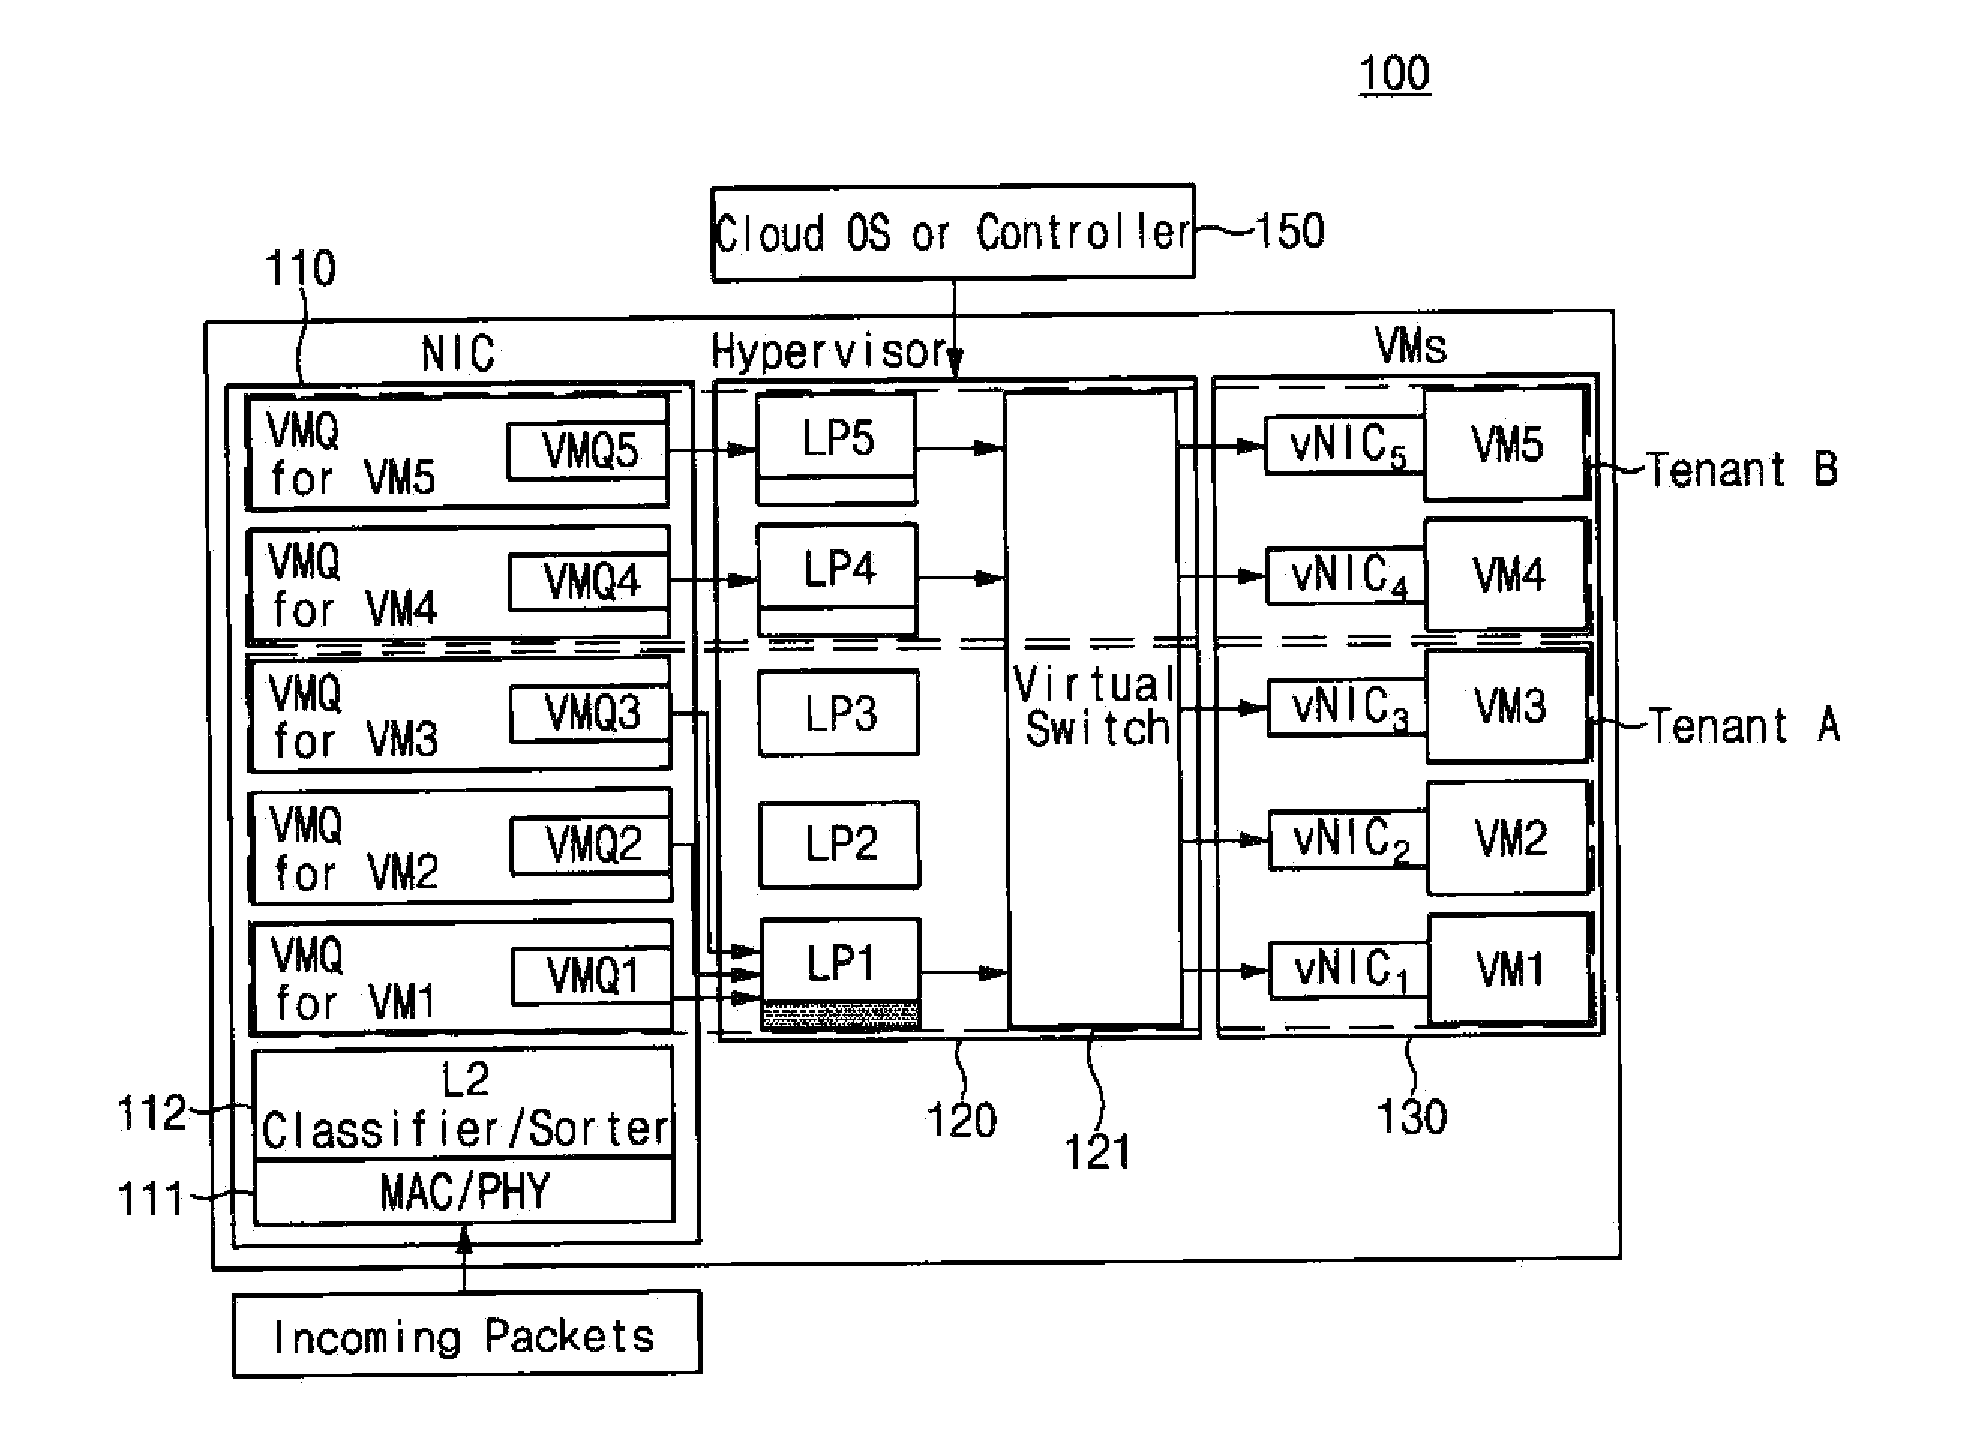 Apparatus and method for mapping of tenant based dynamic processor